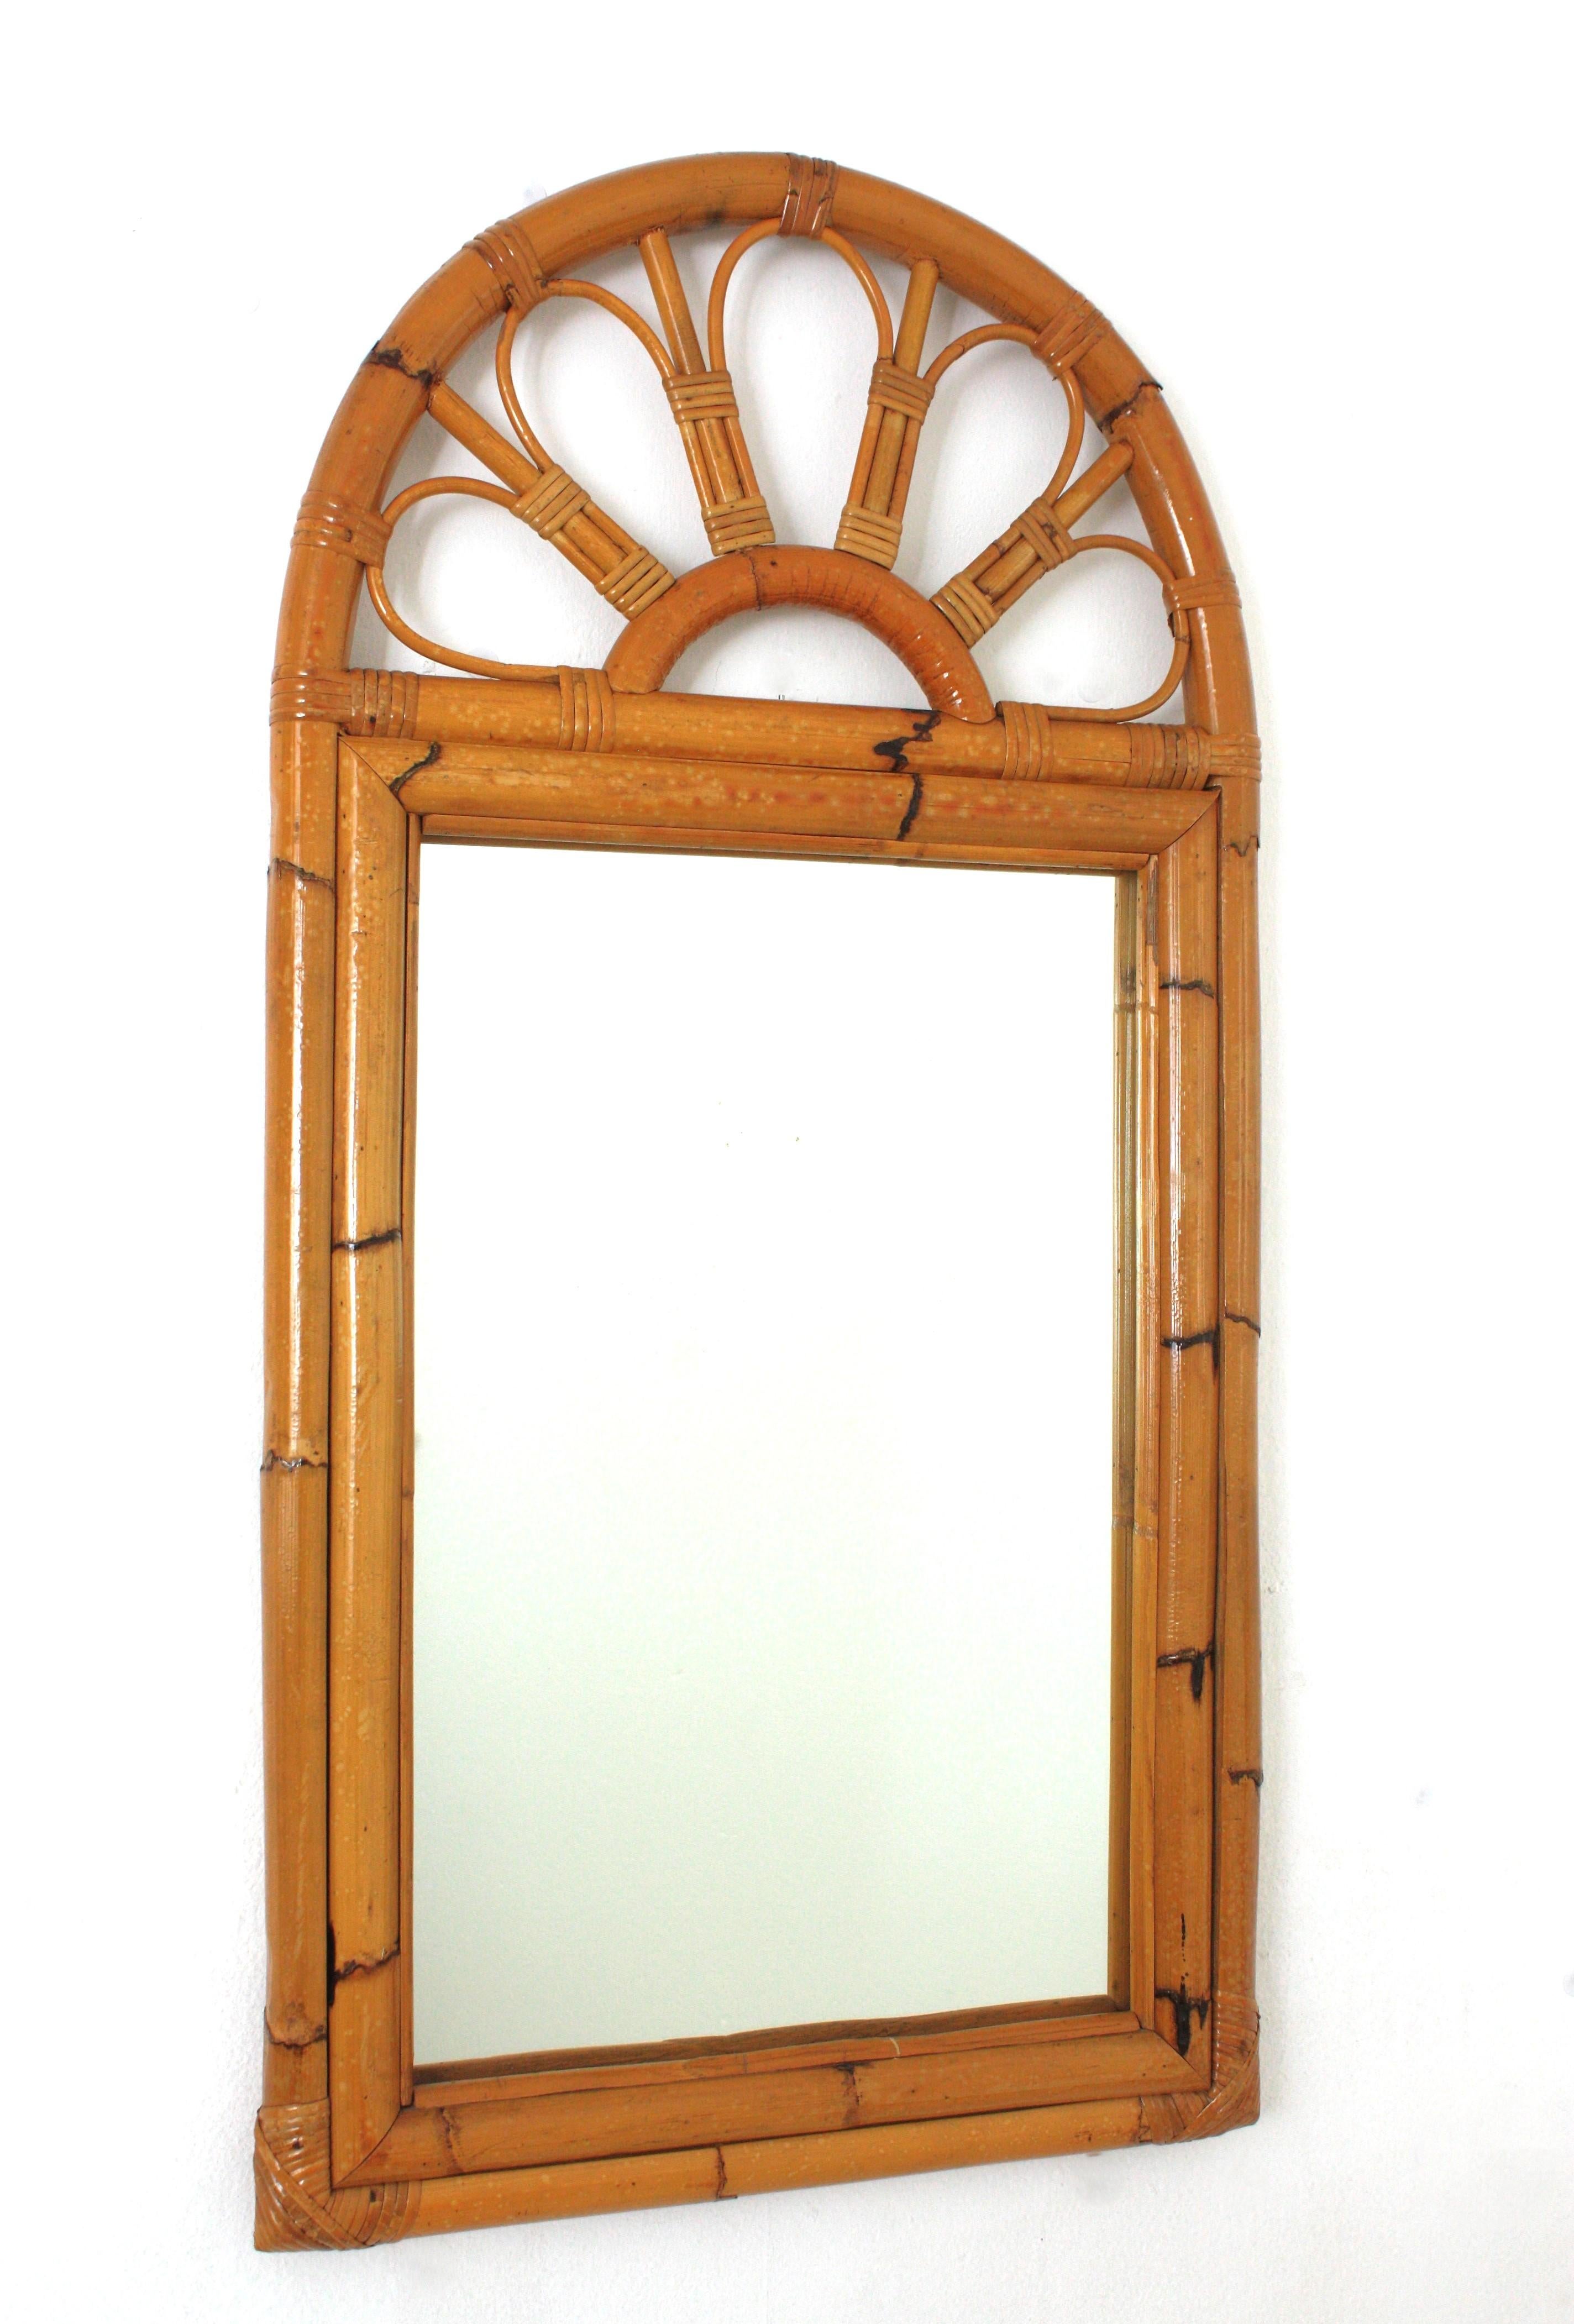 Eye-catching midcentury bamboo and rattan mirror with arched top. Spain, 1960s
This beautiful mirror was handcrafted with bamboo cane and rattan combining midcentury and tiki accents.
It will be a nice addition to be used in a bathroom or as wall